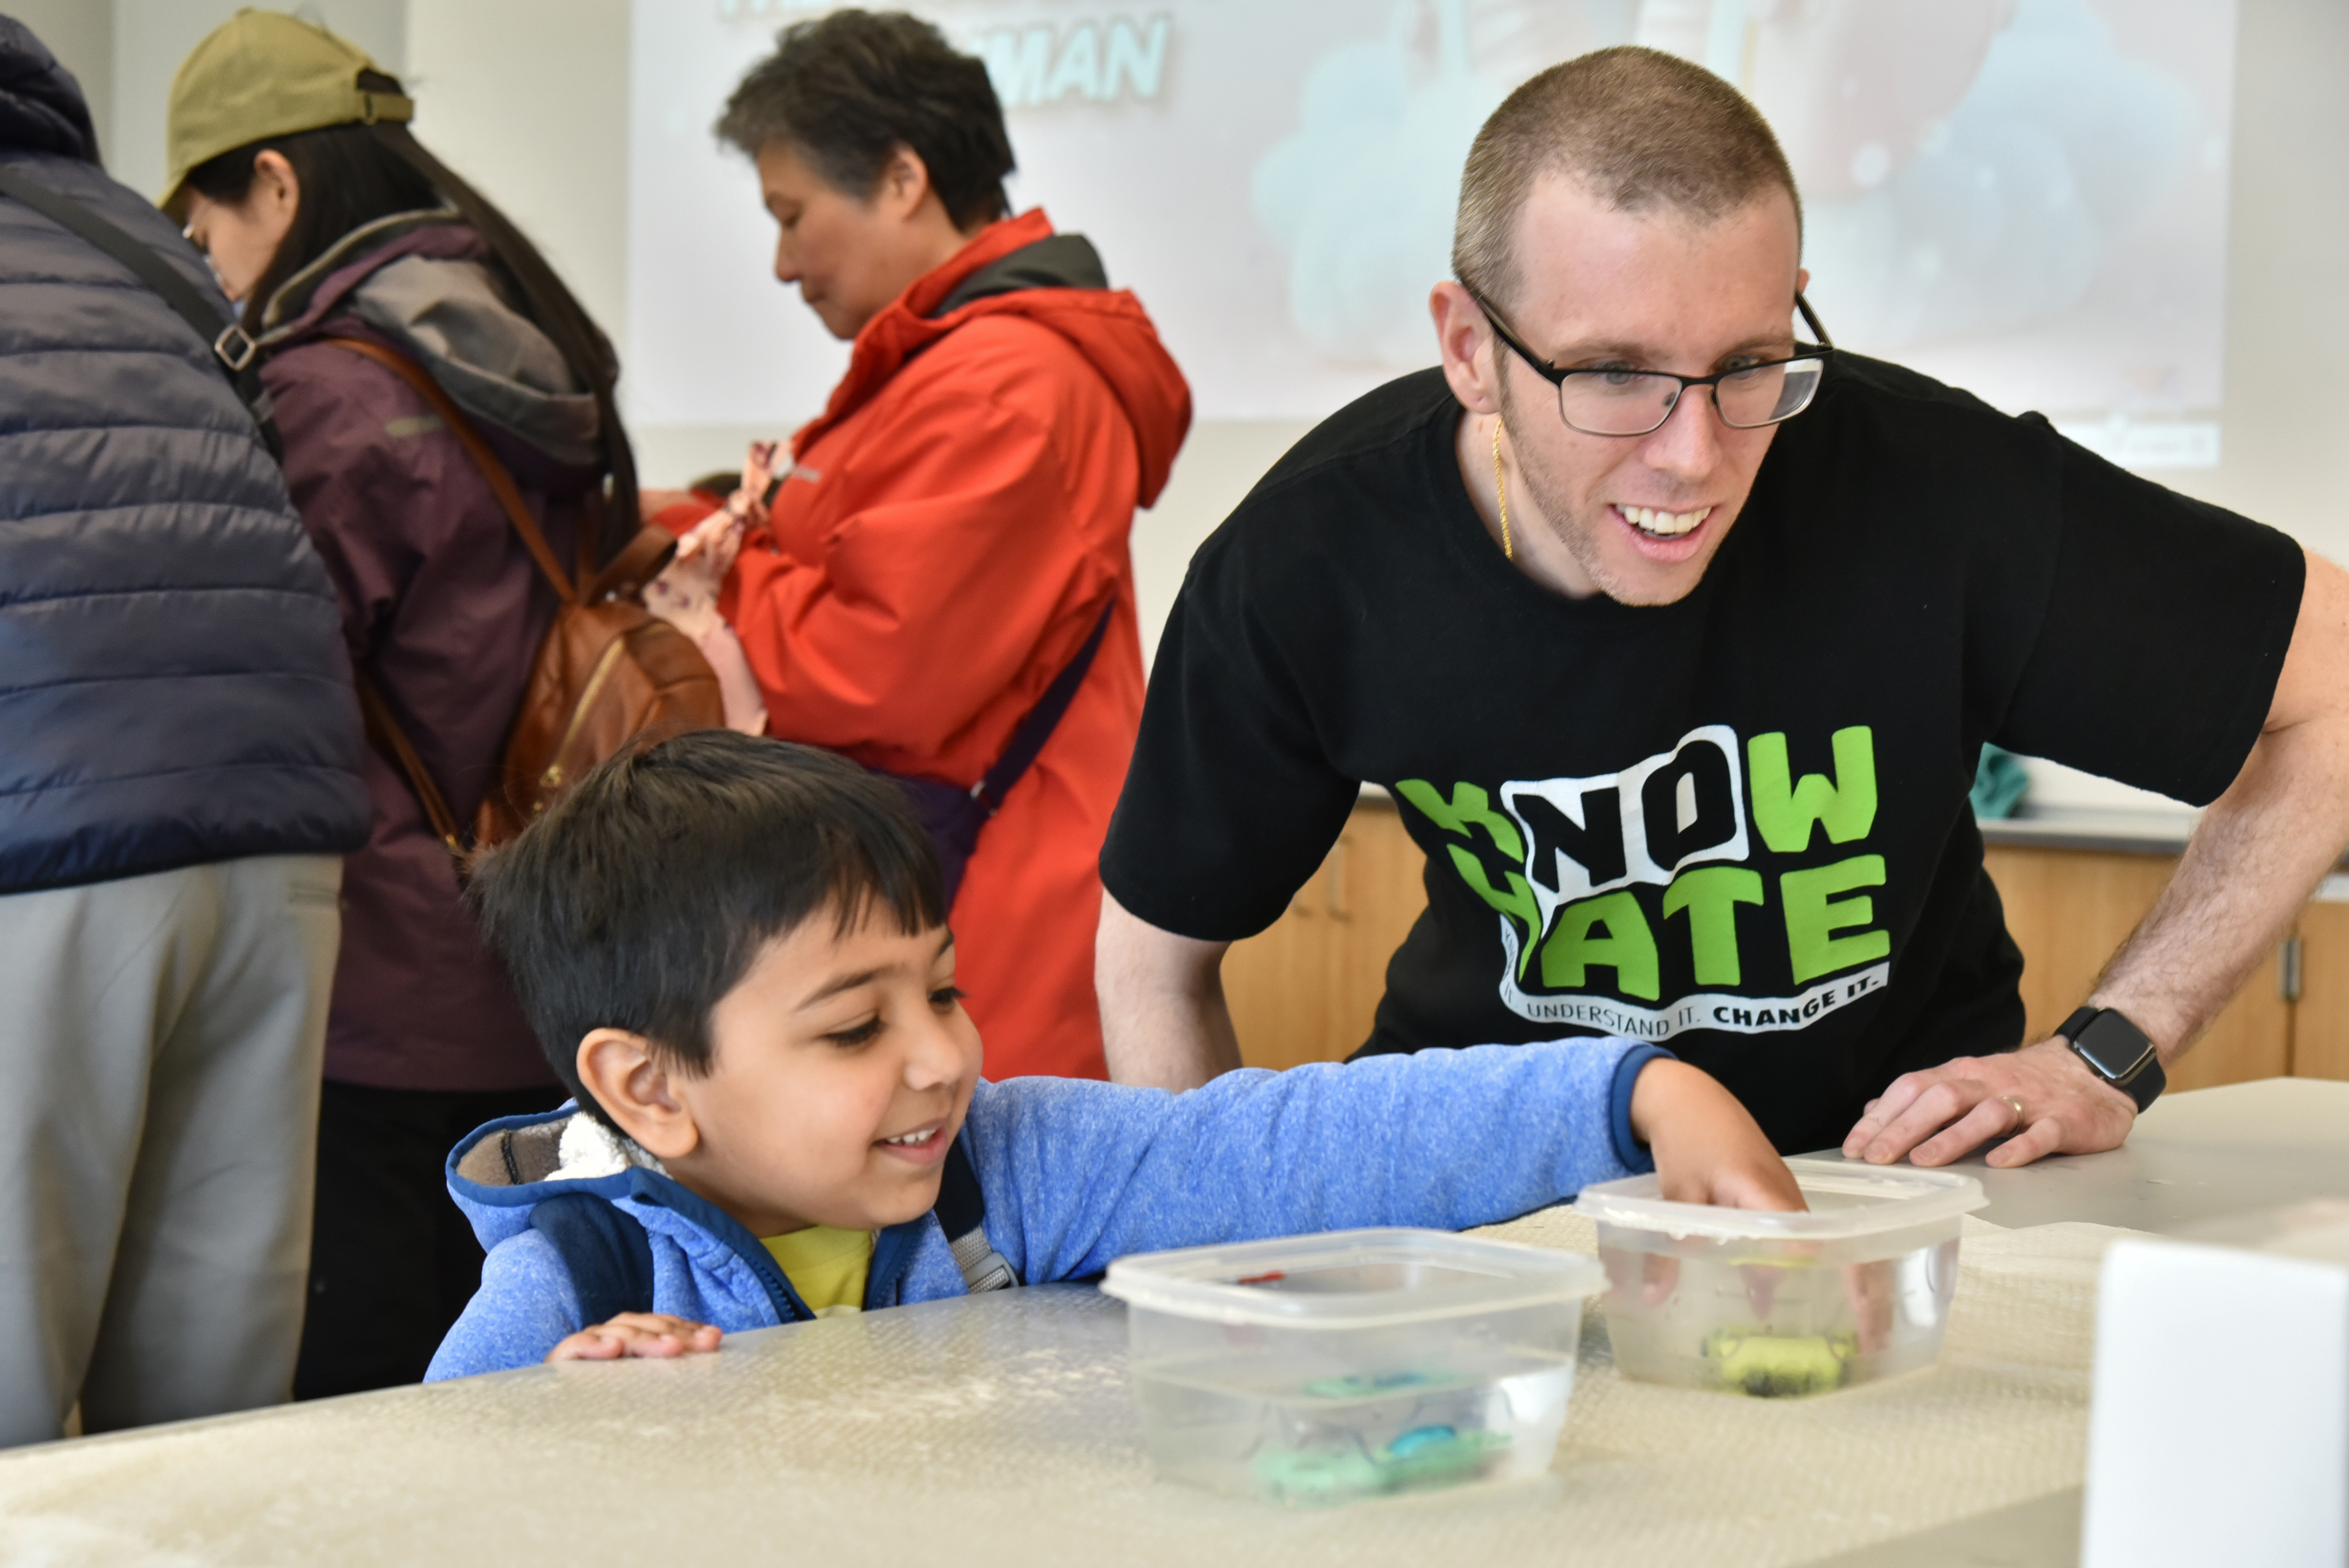 Thomas Brown, a faculty member in the Chemistry Department, helps demonstrate to young visitors thermochromic color-changing coatings on various objects, which change color at different temperatures. This was one of many family-friendly science-based activities taking part in the Shineman Center both during the day of the eclipse (pictured) as well as STEM Community Day on April 6.